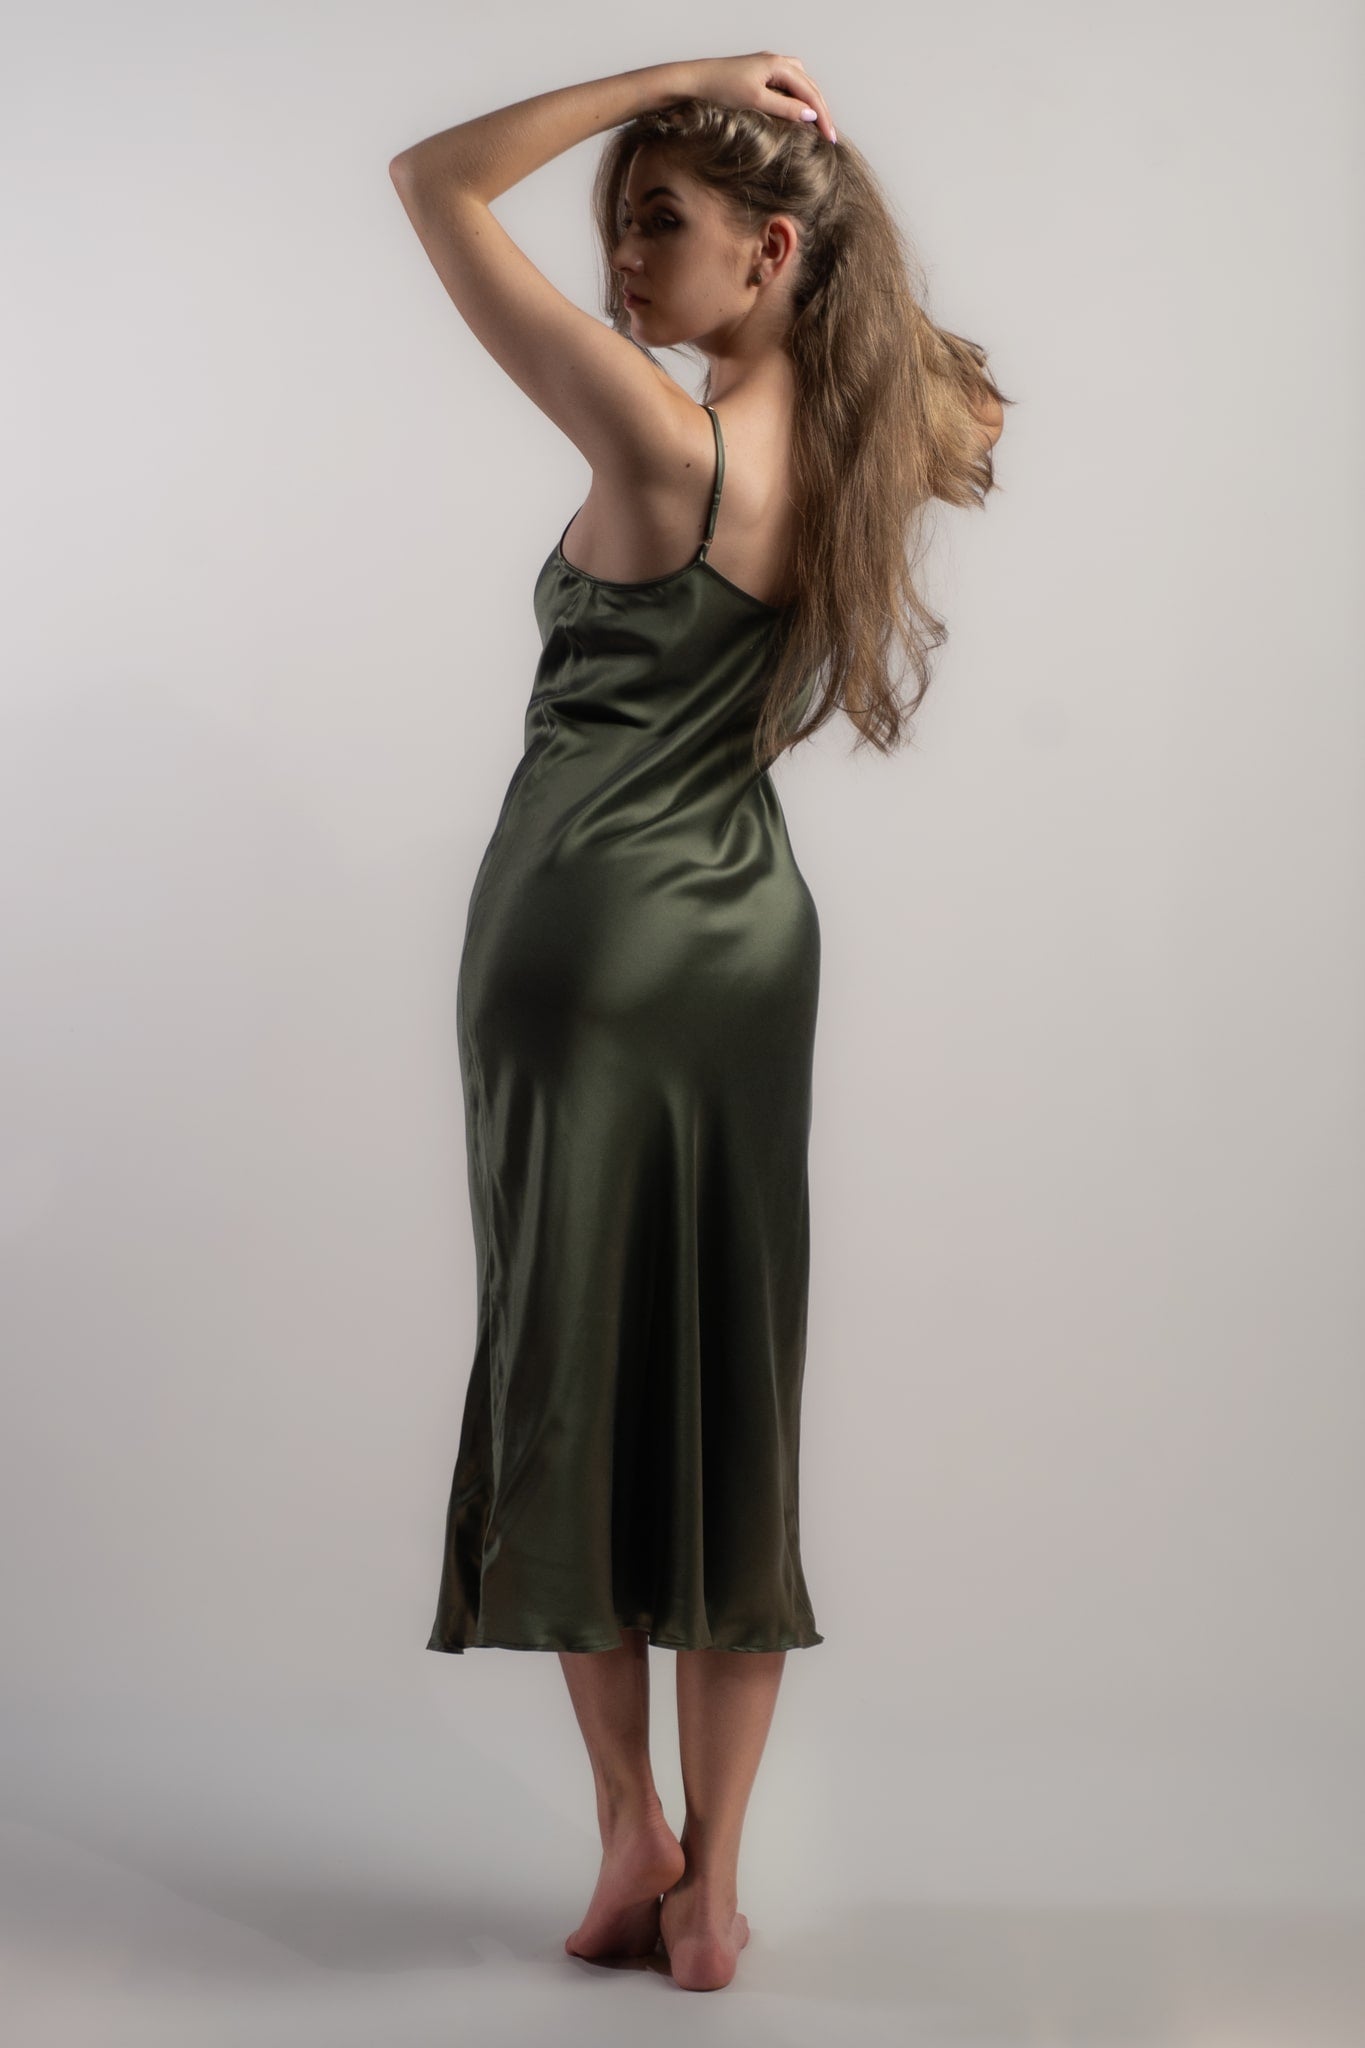 Woman wearing Silk Closet silk slip dress in olive green. 100% pure sandwashed silk with bias cut and adjustable spaghetti straps. 90s style dress.  Back view